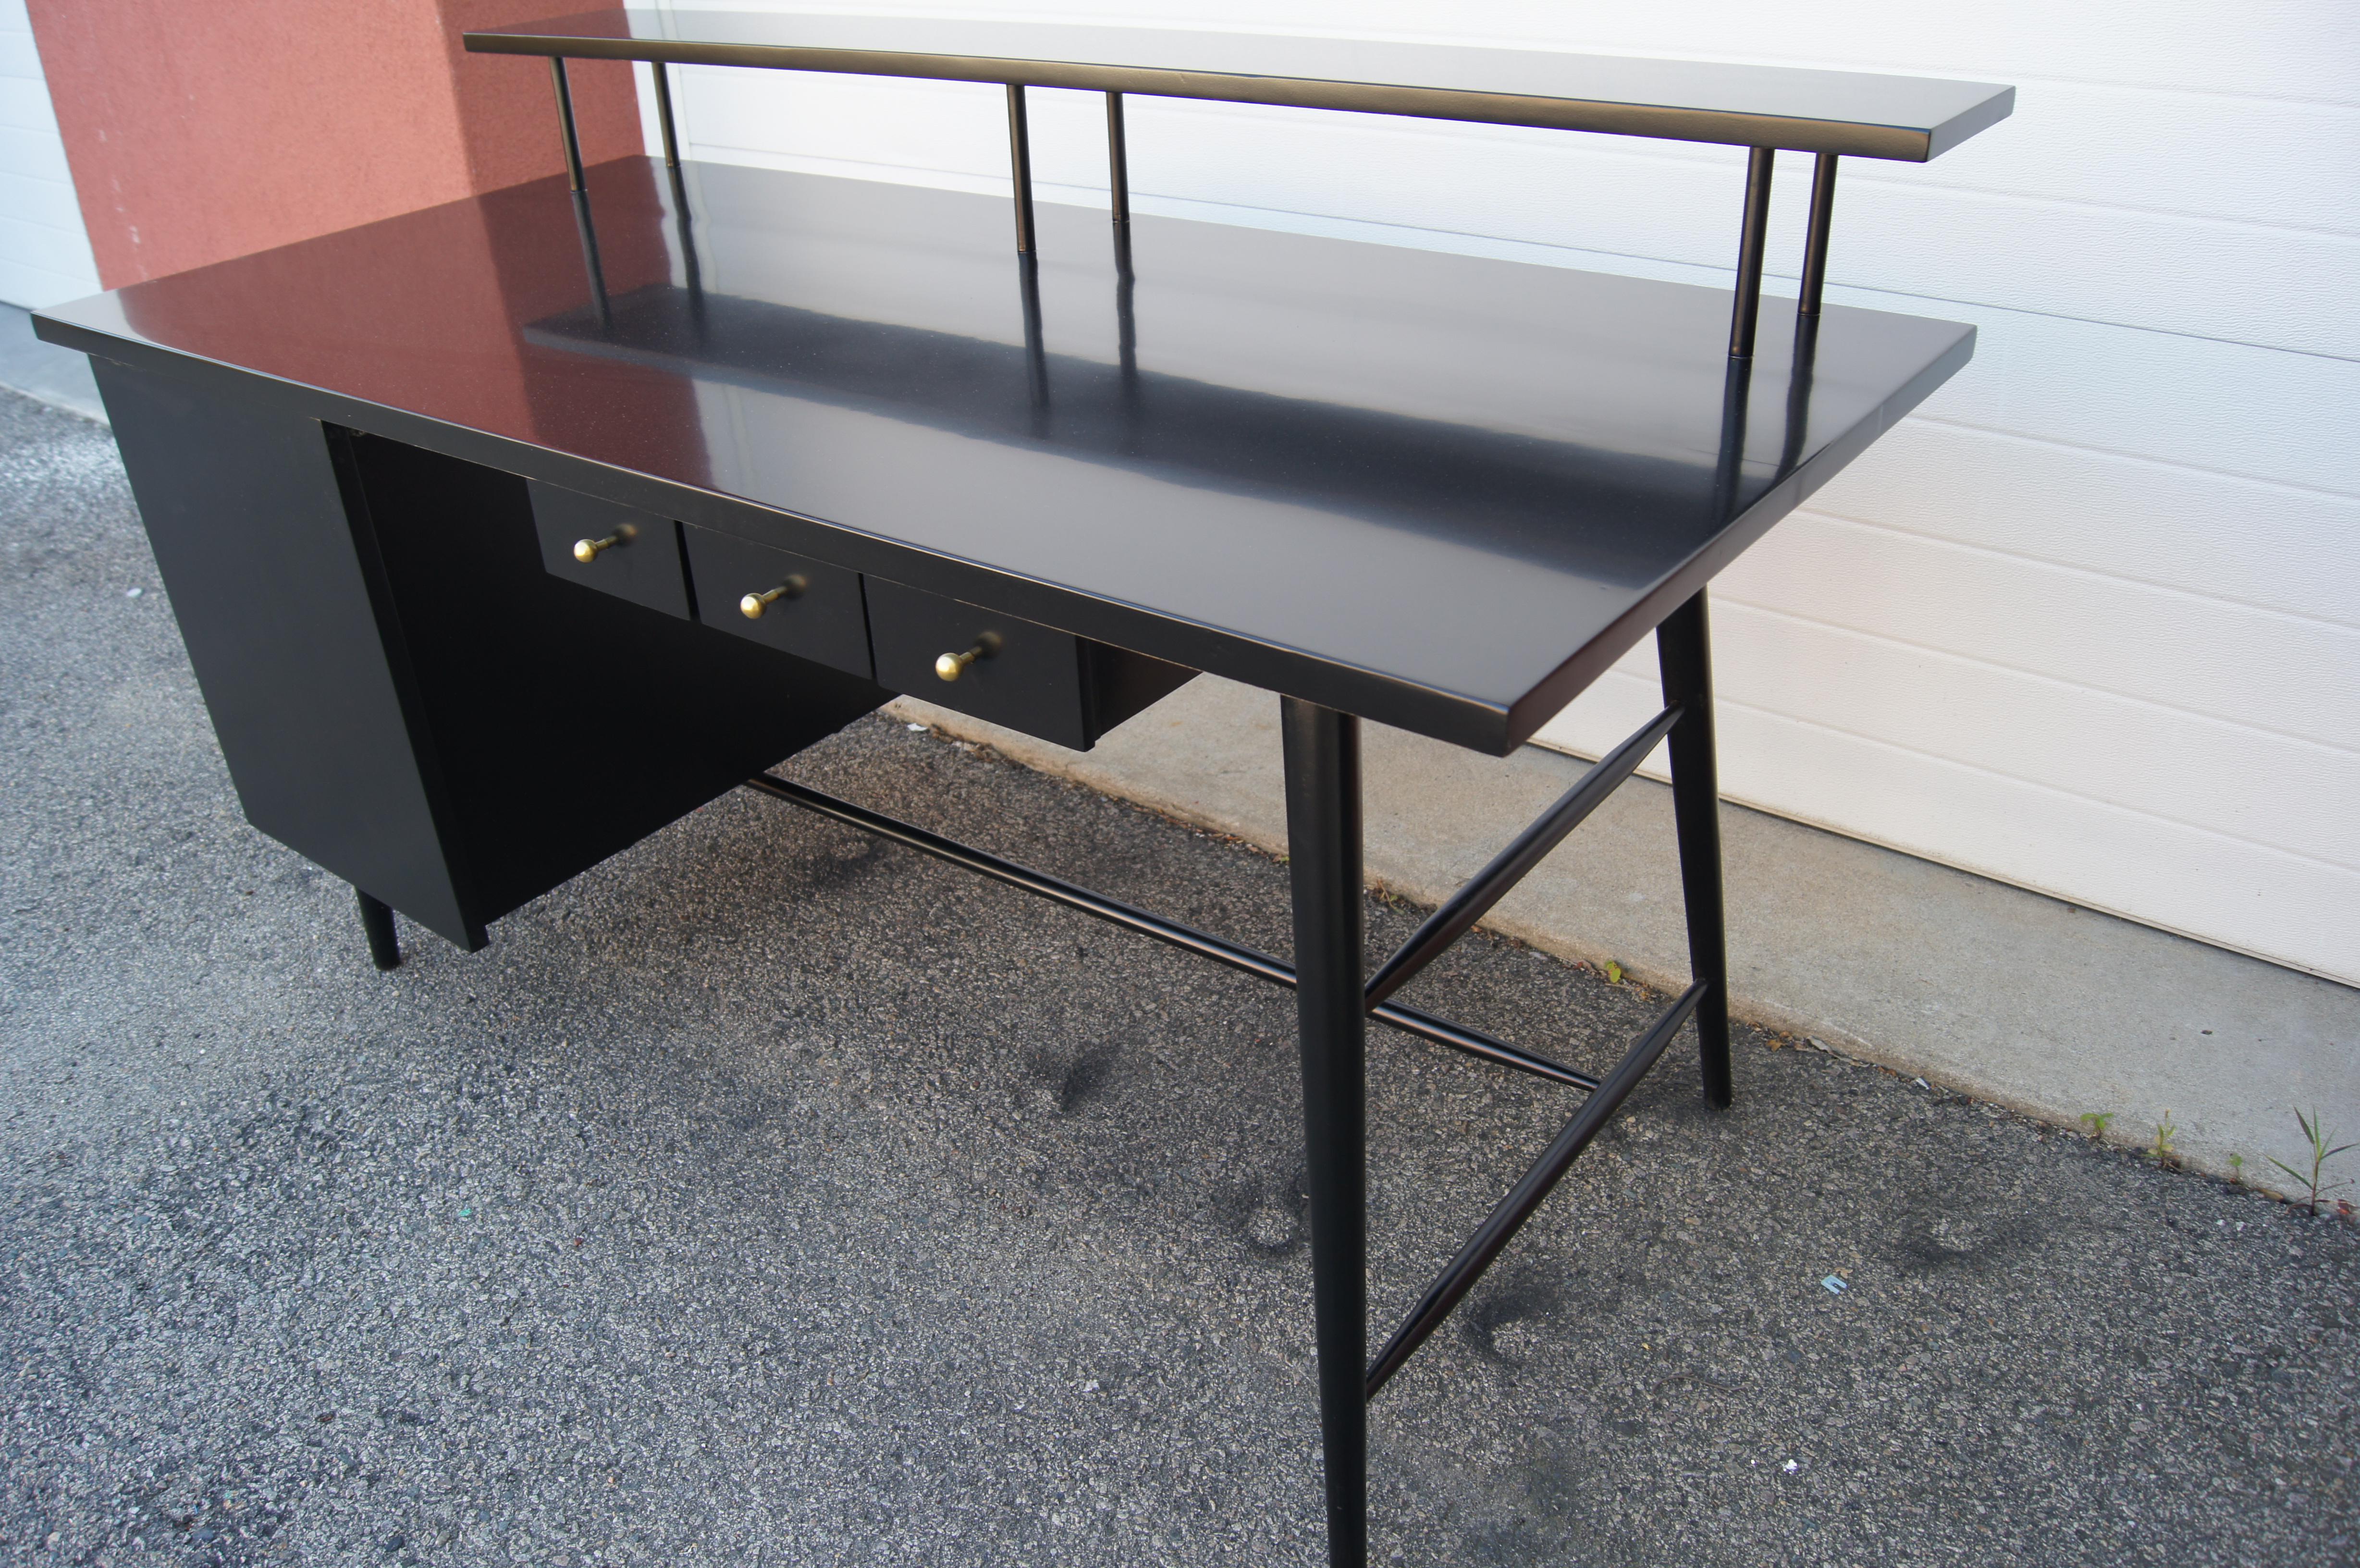 Mid-20th Century Ebonized Predictor Group Desk by Paul McCobb for O'Hearn Furniture Company For Sale